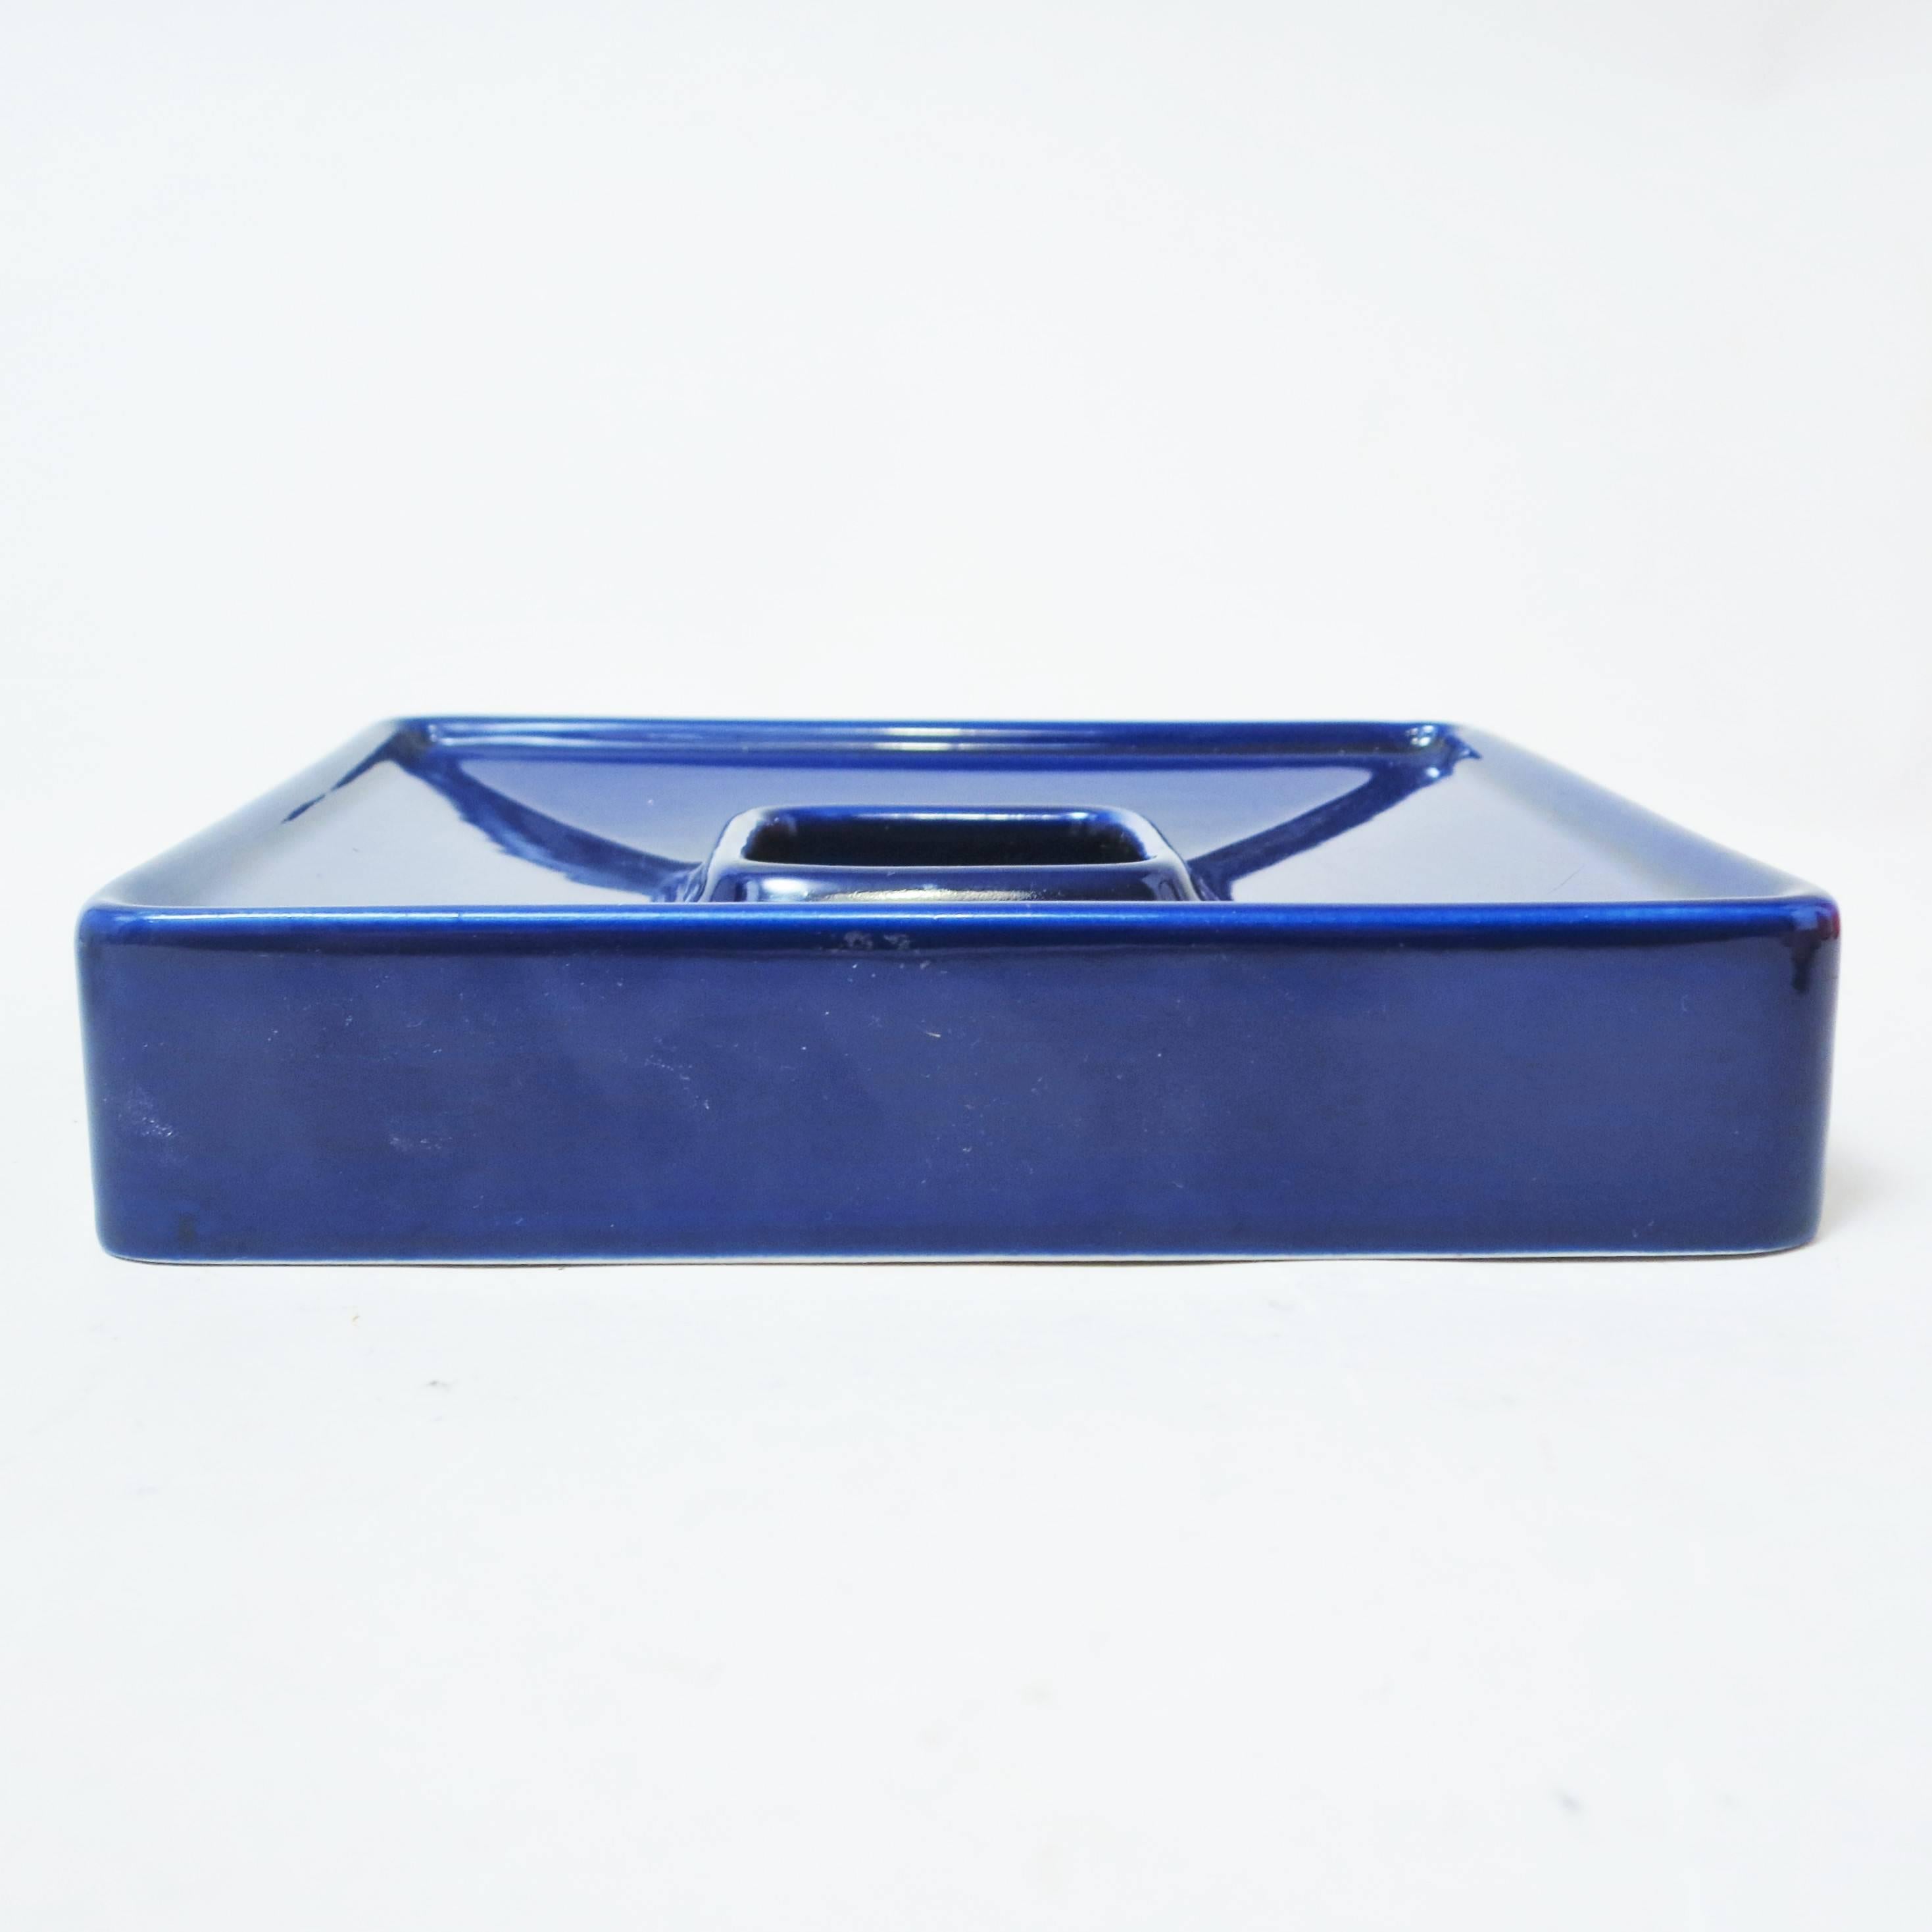 Large square ashtray in blue ceramic designed by Angelo Mangiarotti edited by Fratelli Brambilla in the late 1960s
Stamped under the base.